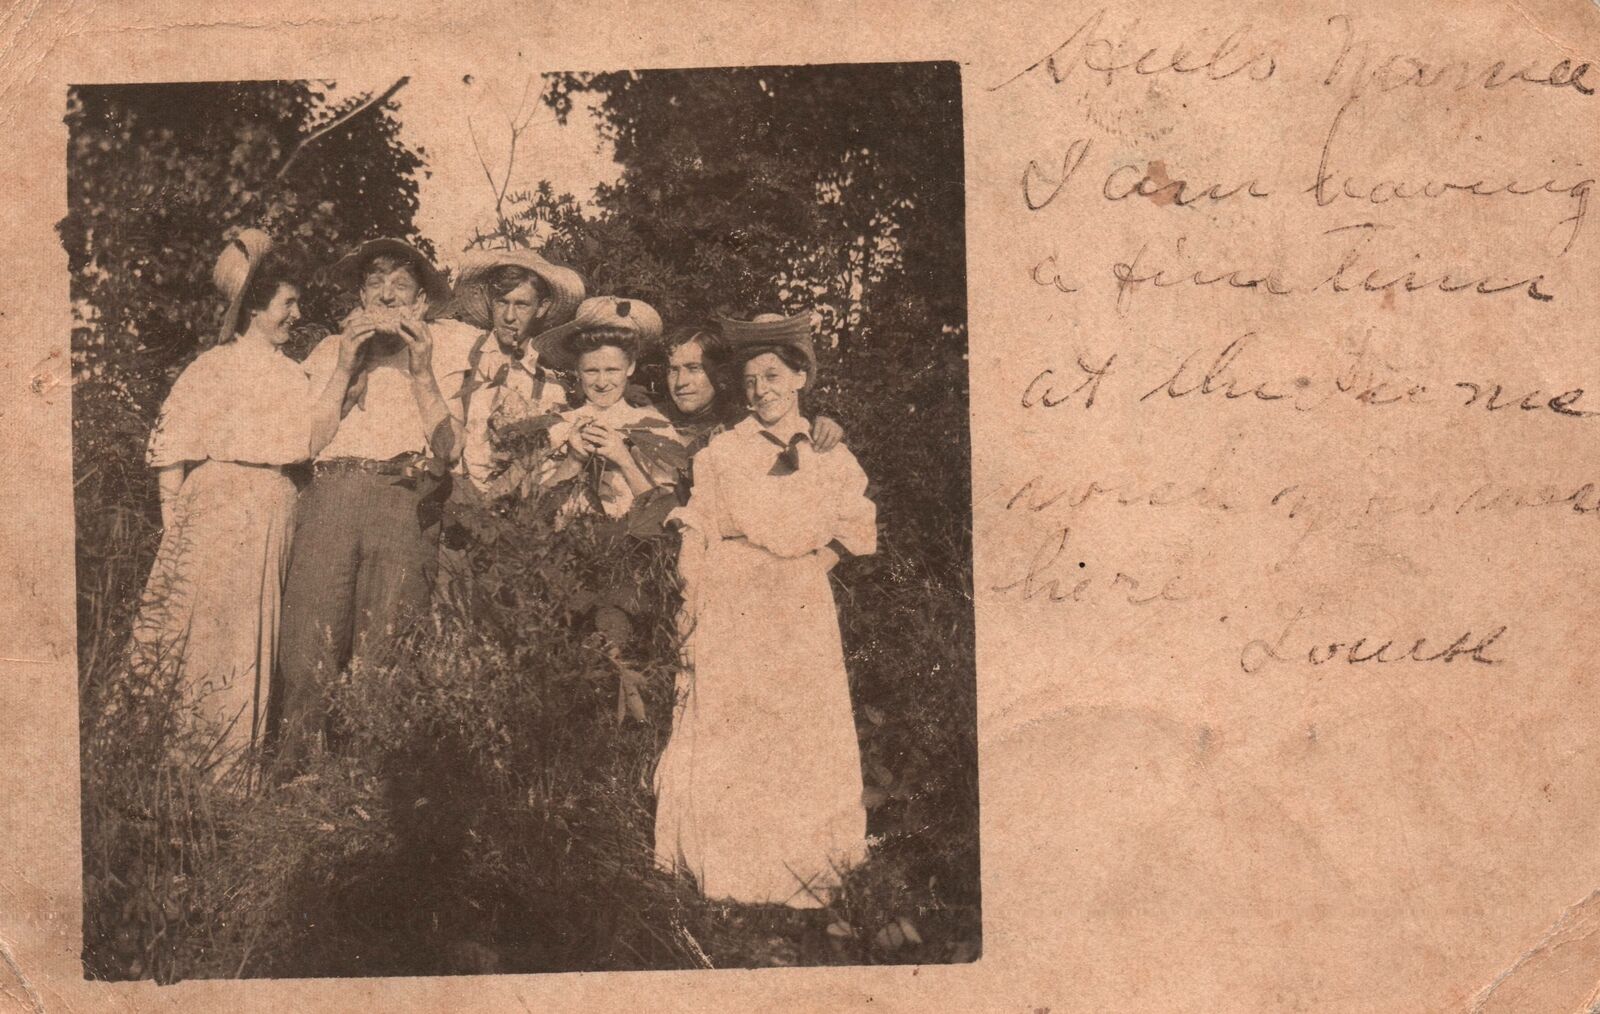 VINTAGE POSTCARD GROUP OF YOUNG ADULTS HAVING FUN MAILED PARKERSBURG W. VA 1907